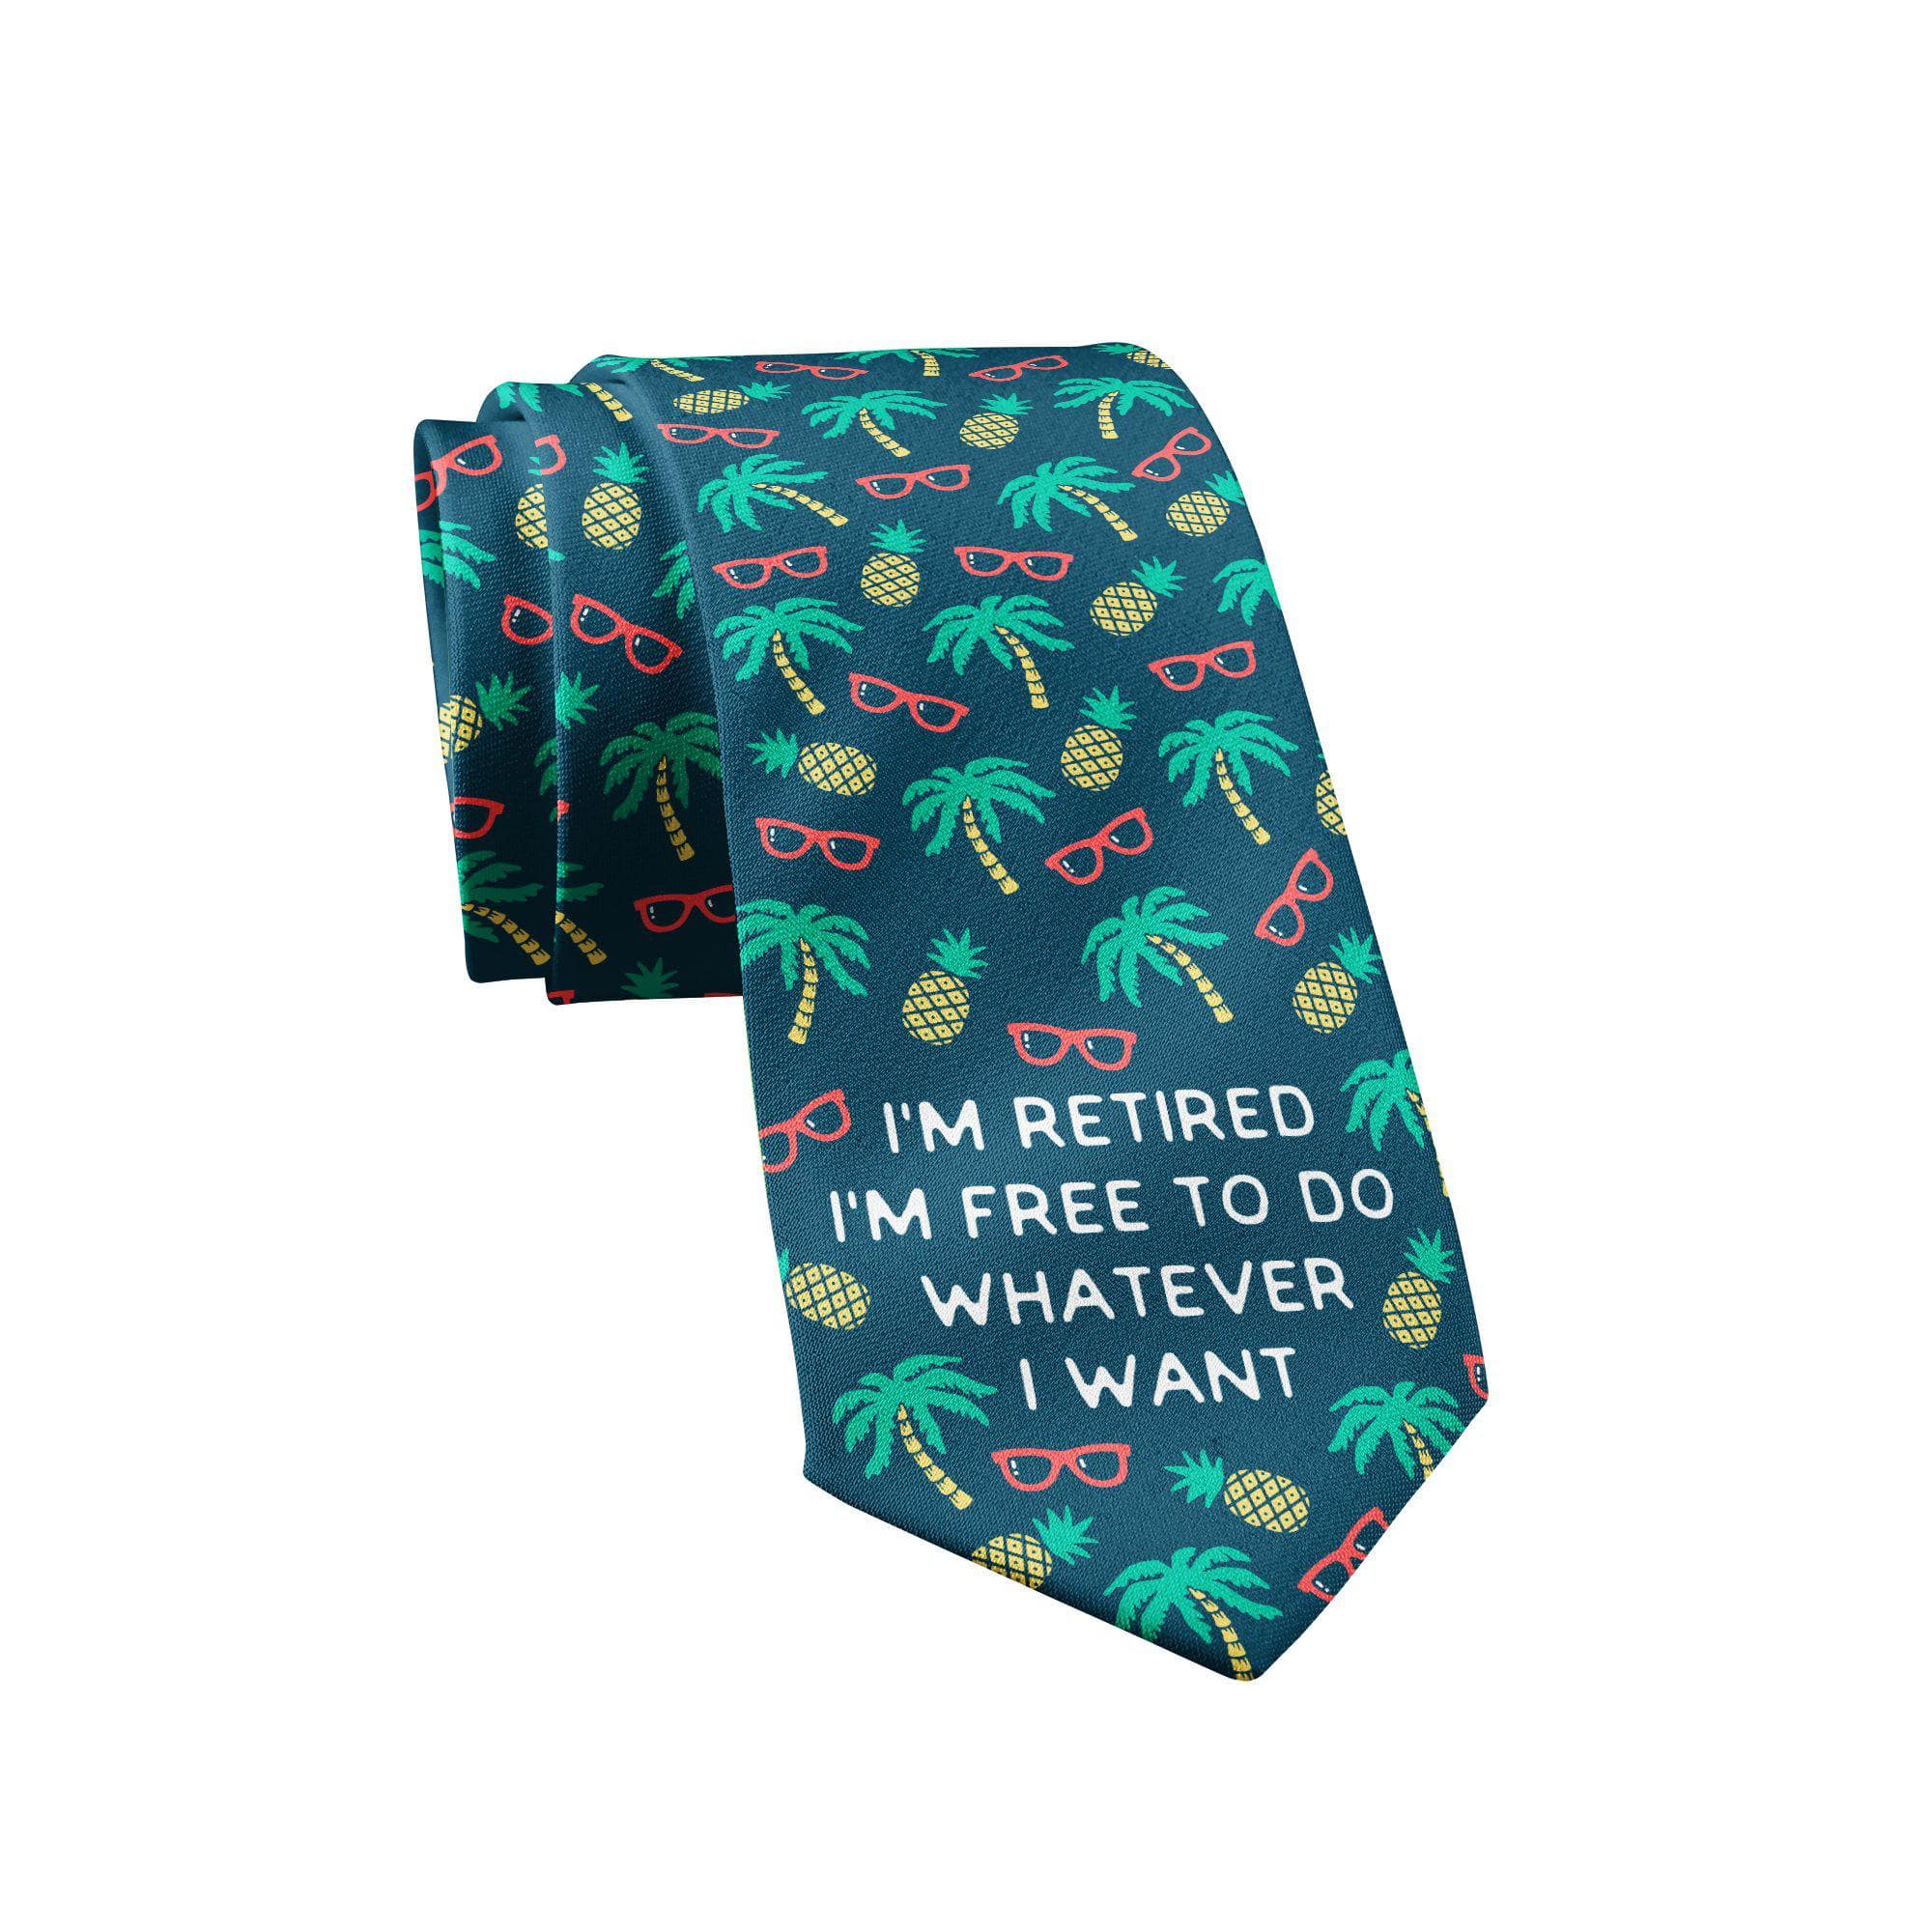 I'm Retired I'm Free To Do Whatever I Want Neck Tie - Crazy Dog T-Shirts